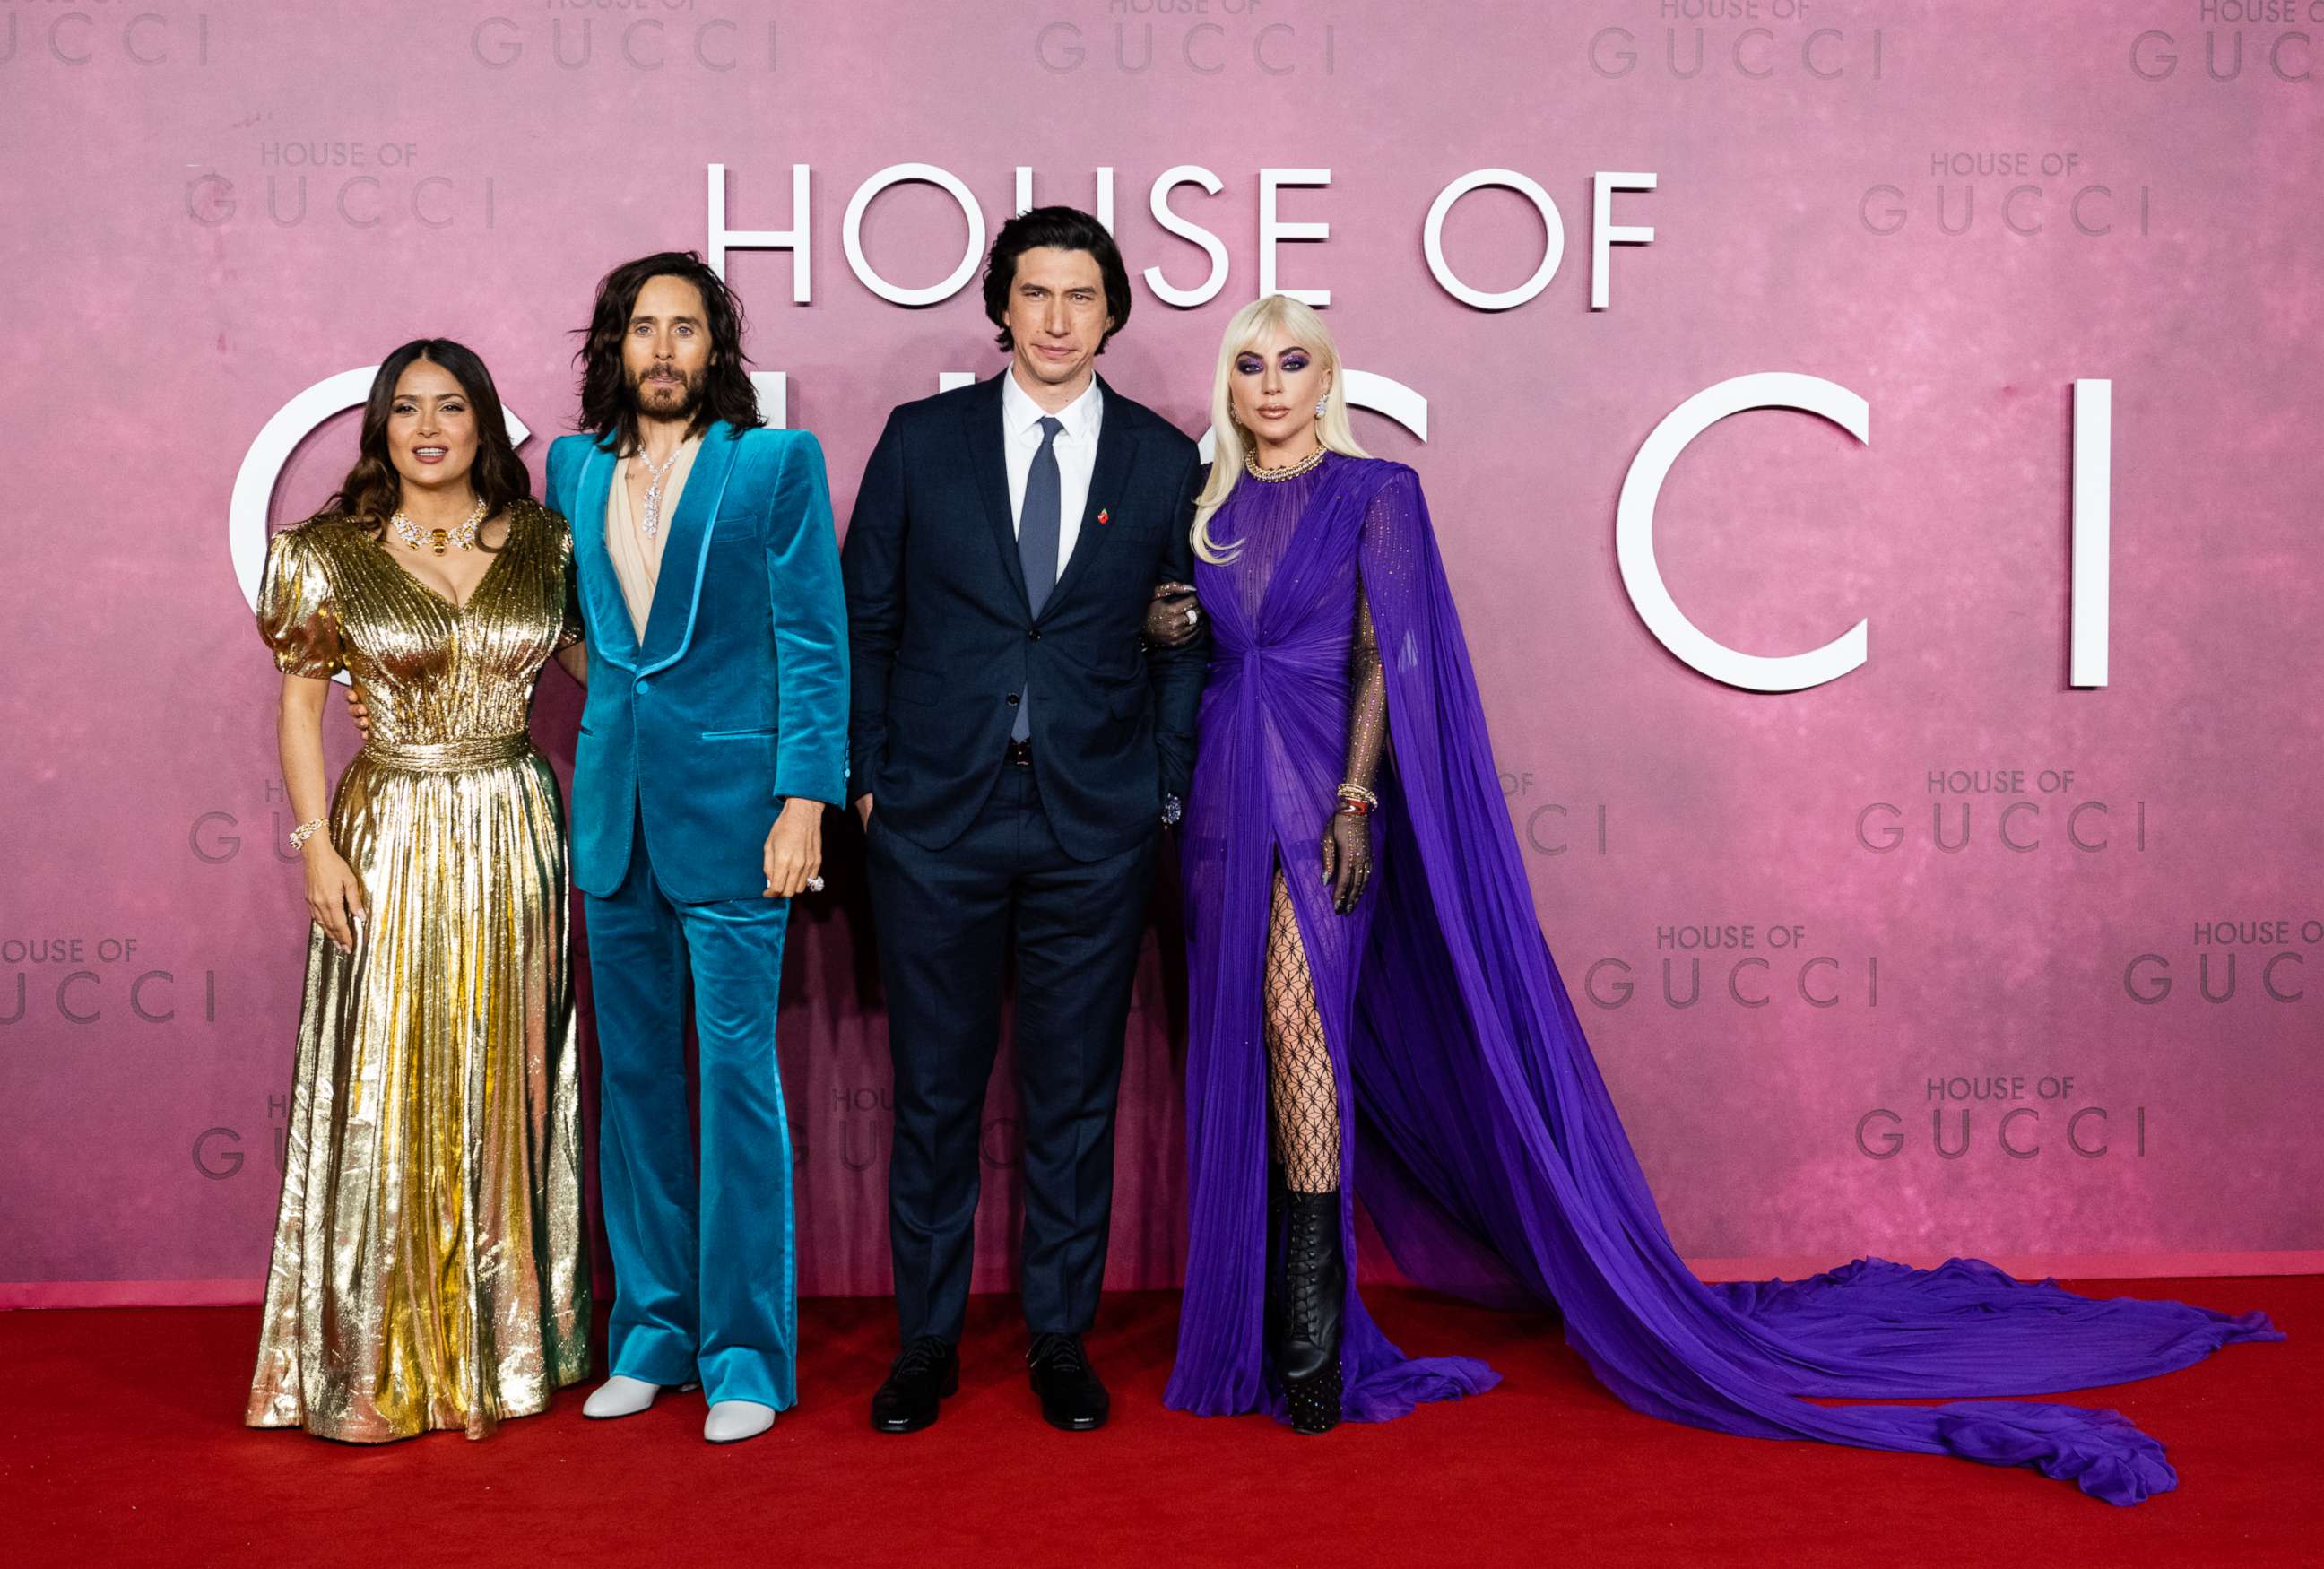 PHOTO: Salma Hayek, Jared Leto, Adam Driver and Lady Gaga attend the UK Premiere Of "House of Gucci" at Odeon Luxe Leicester Square on Nov. 9, 2021, in London.